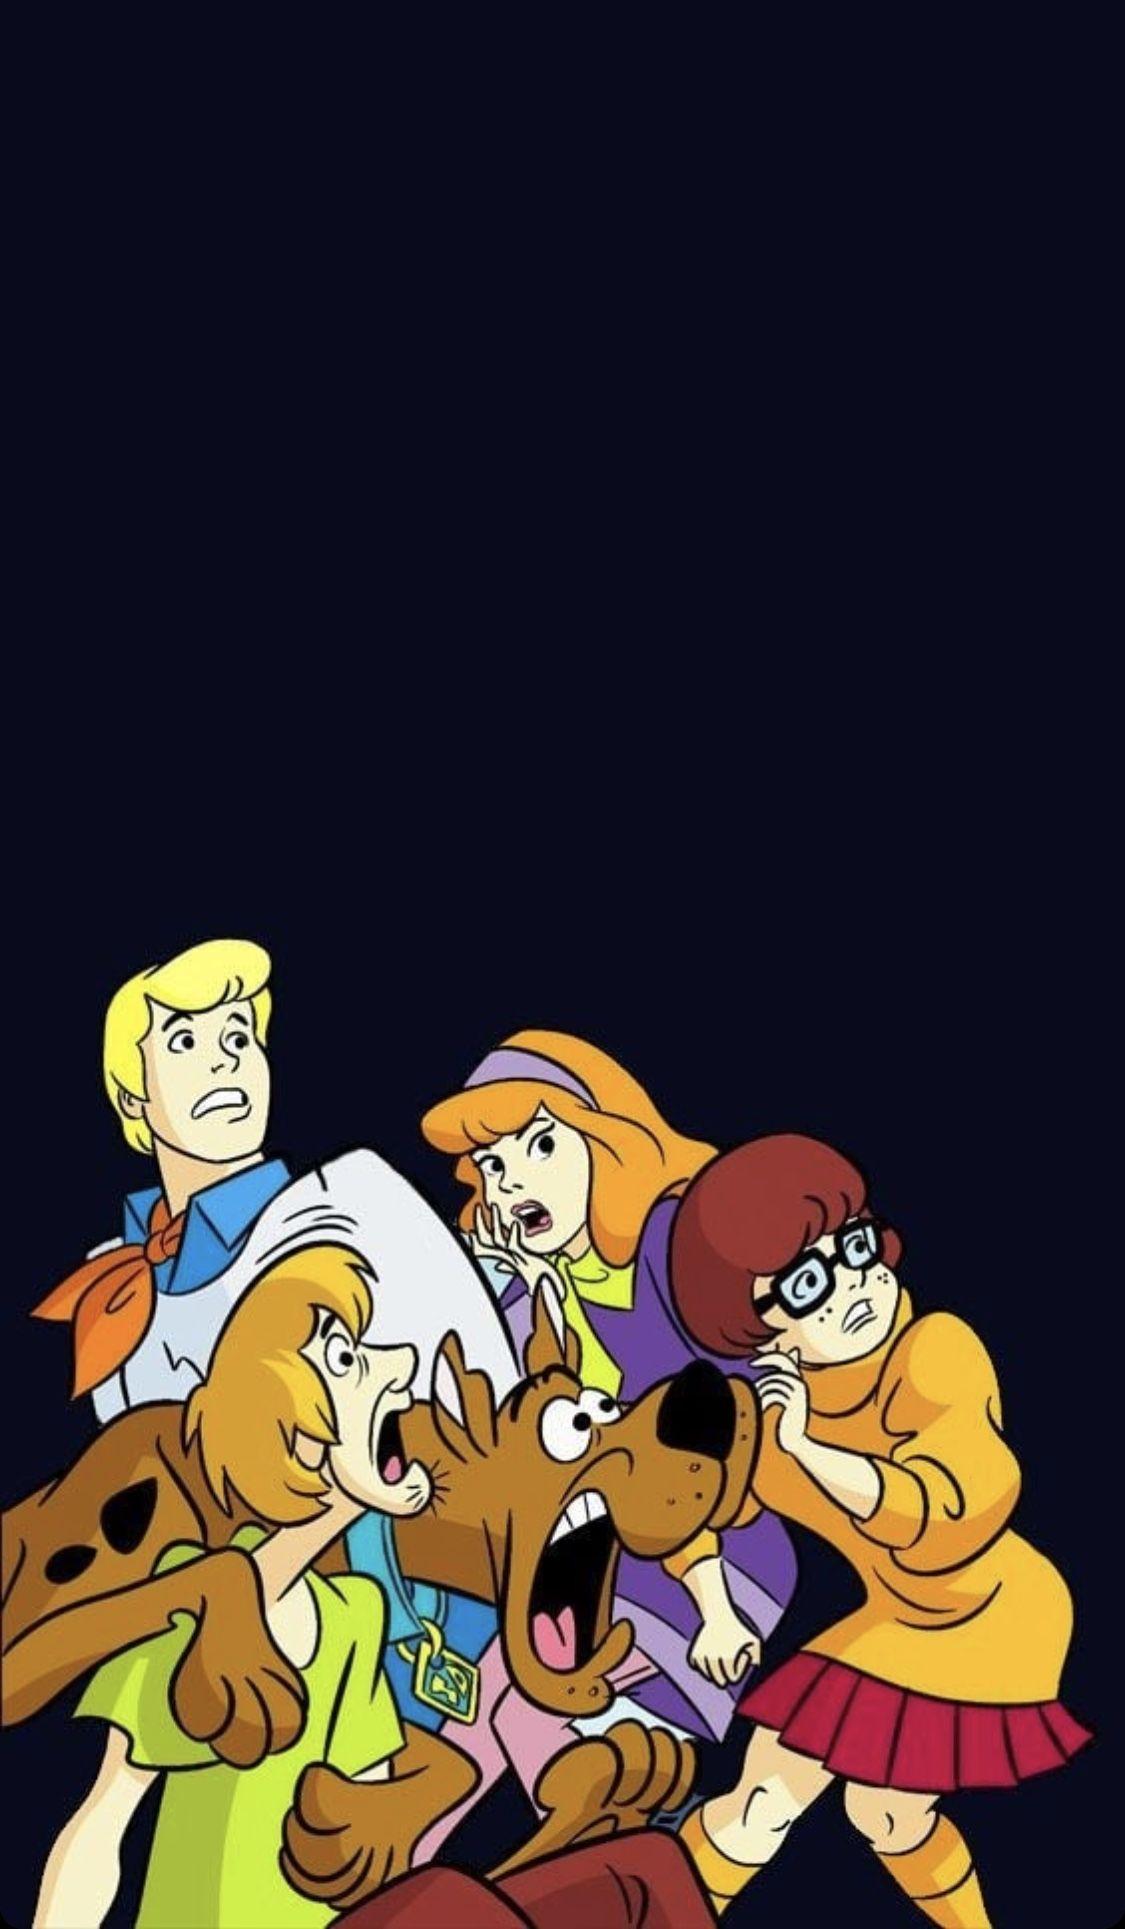 Awesome Scooby Doo iPhone Wallpapers  WallpaperAccess  Scooby doo images Scooby  doo Scooby